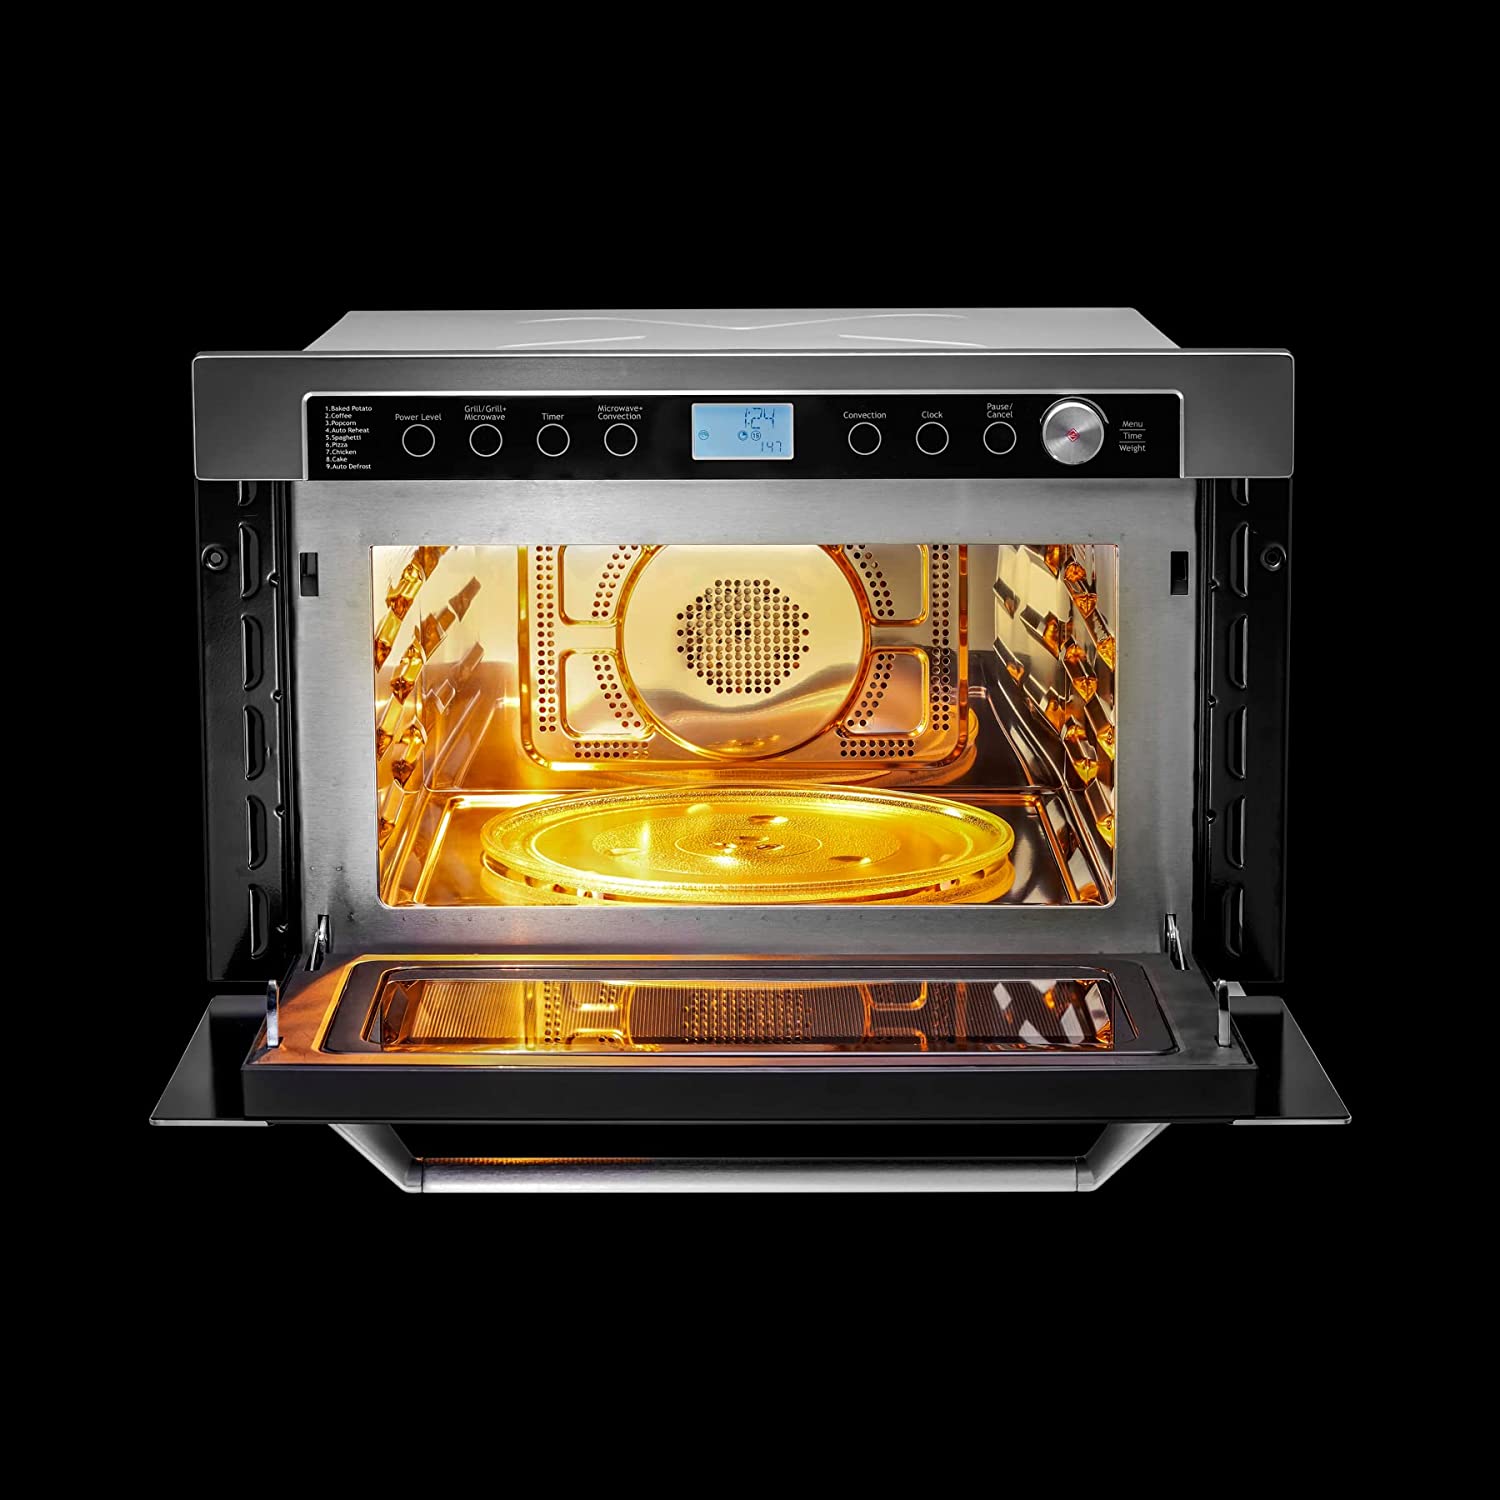 IFB 34BIC1 34 L Convection Built in Microwave Oven (Metallic Silver)